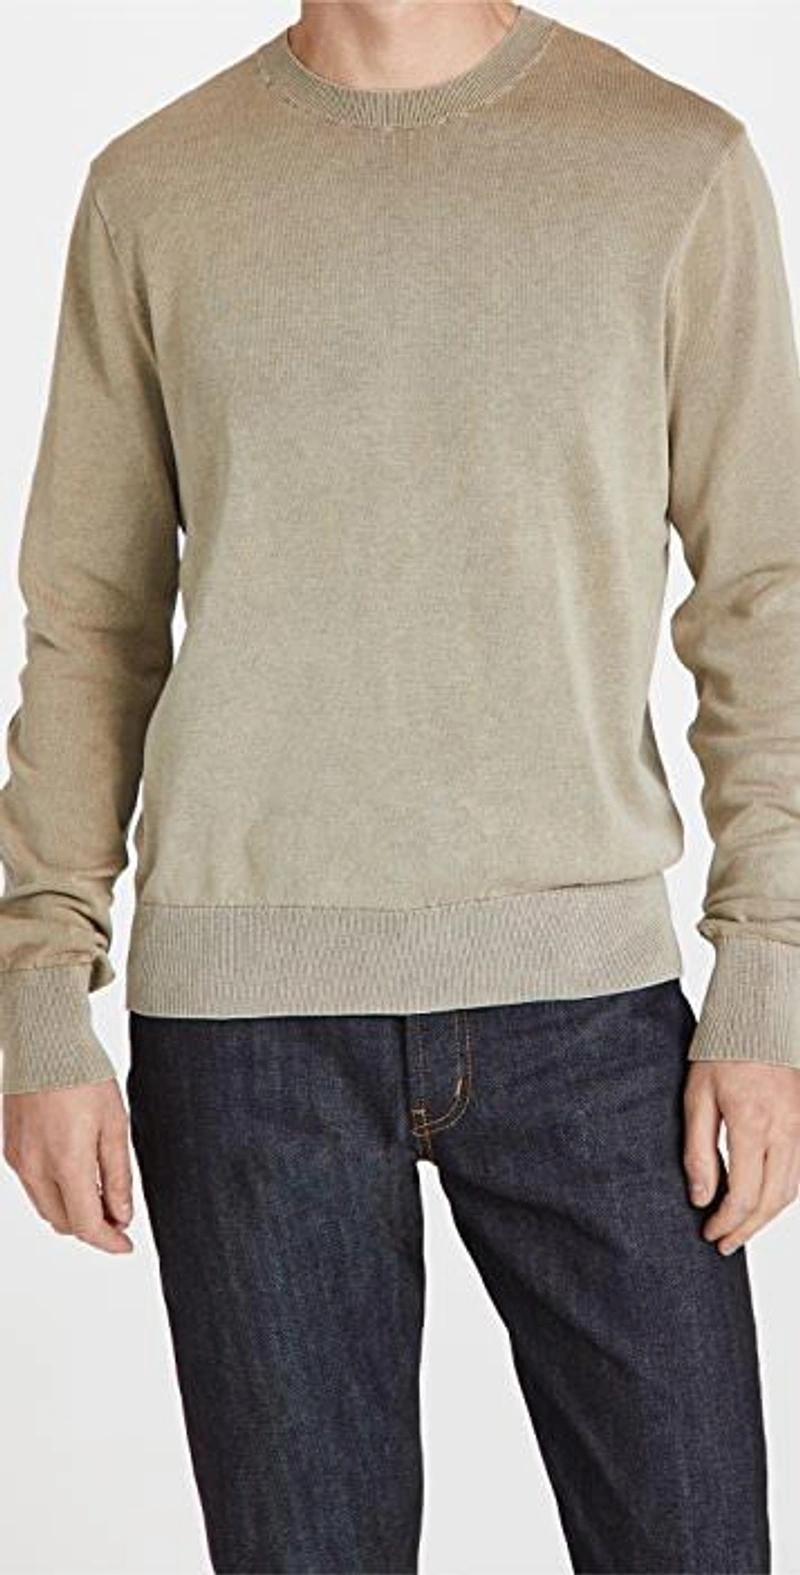 shopbop.com's Posts | 搭配: Rag & Bone Men's Caleb Pullover Sweater In Sage；Naked & Famous Weird Guy Left Hand Twill Selvedge Pants；New Balance 574 Sneakers In Neutral Multi